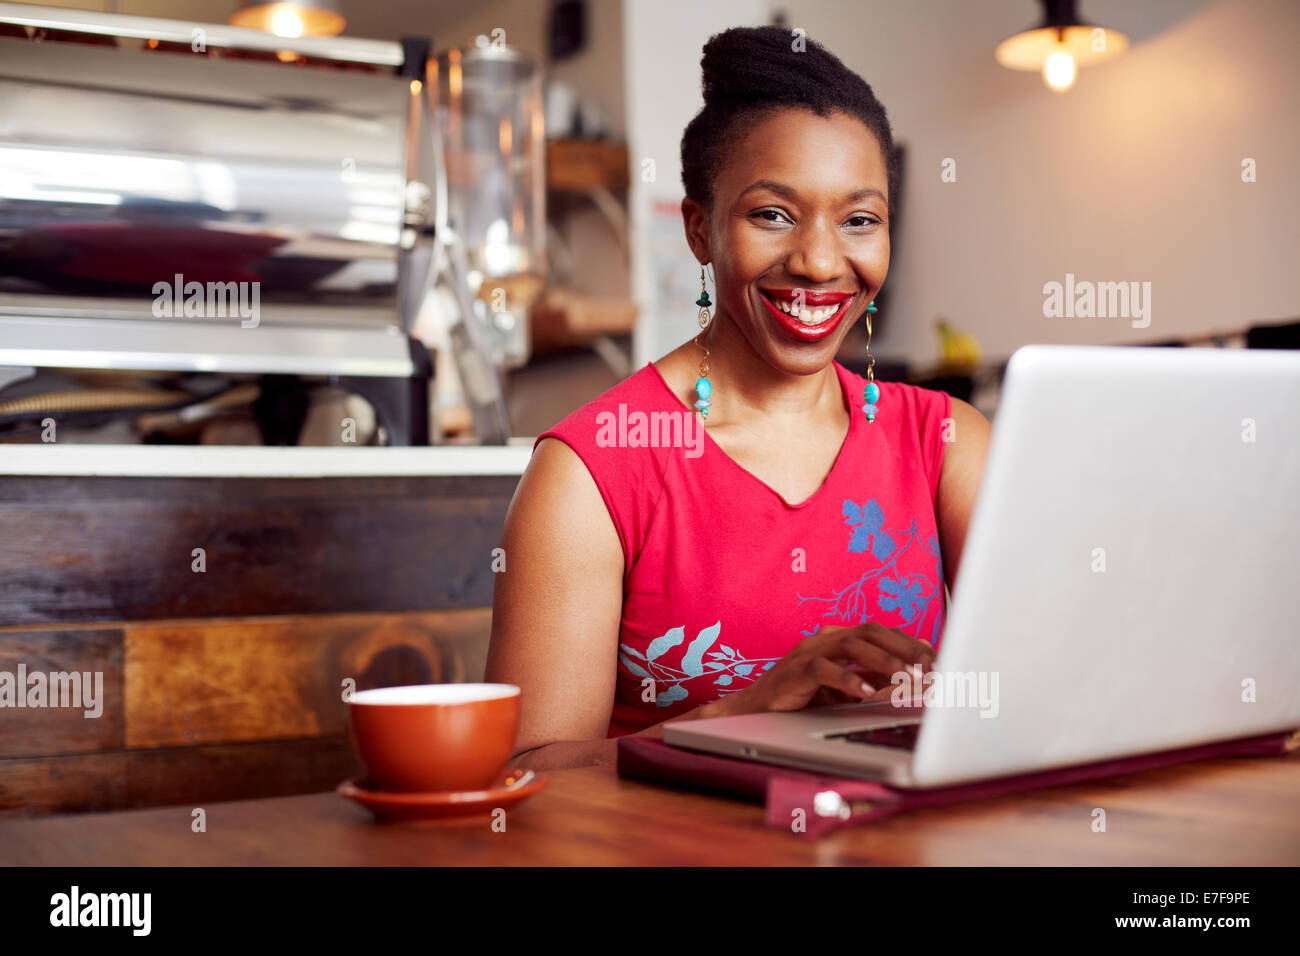 Woman using laptop in cafe Stock Photo